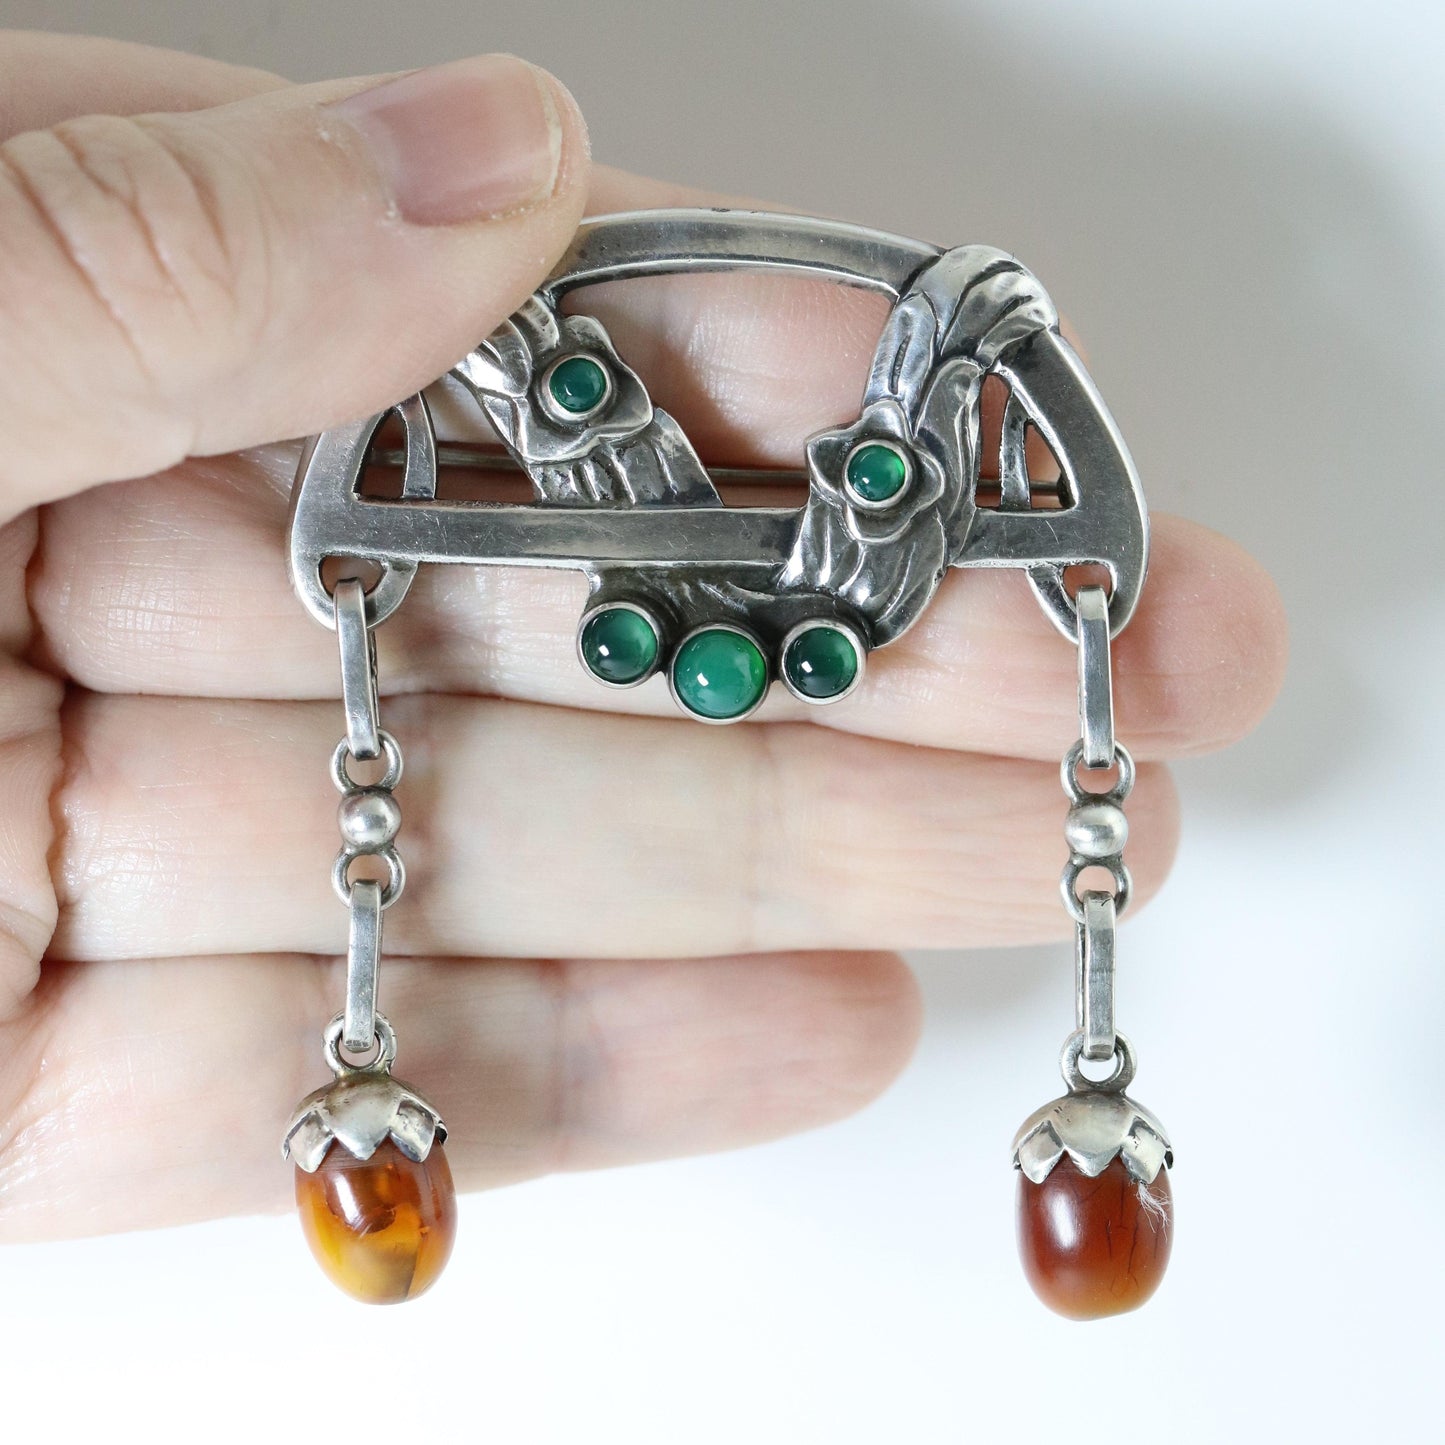 Antique Georg Jensen Jewelry | Rare Early Chrysoprase and Amber Brooch 8 - Carmel Fine Silver Jewelry